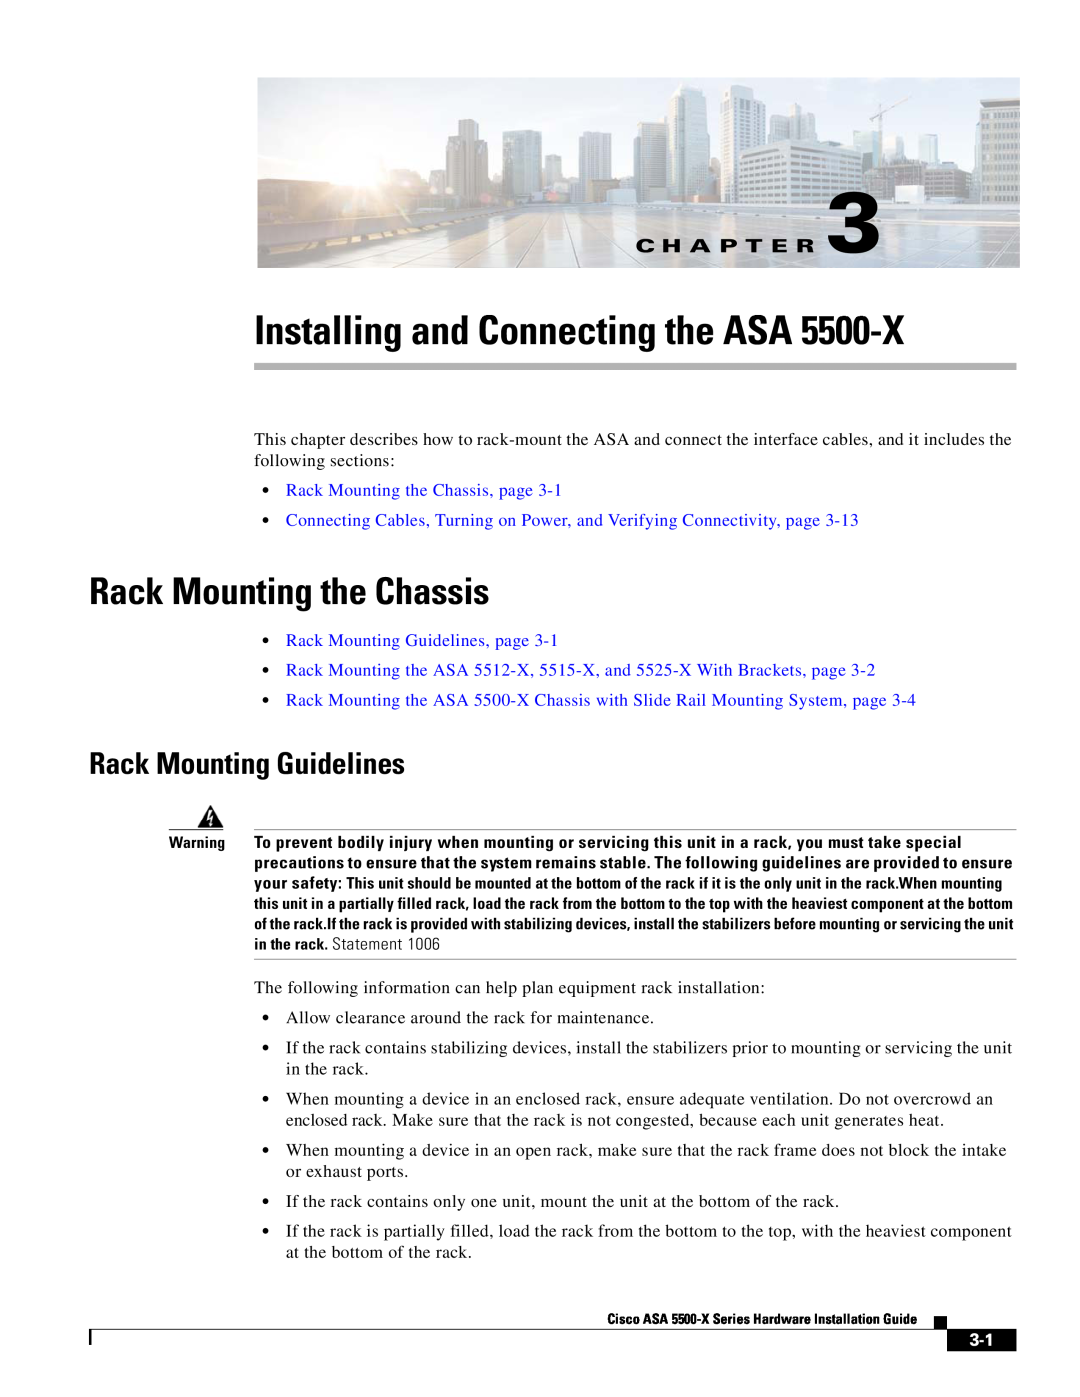 Cisco Systems ASA5555IPSK9 manual Installing and Connecting the ASA, Rack Mounting the Chassis, Rack Mounting Guidelines 